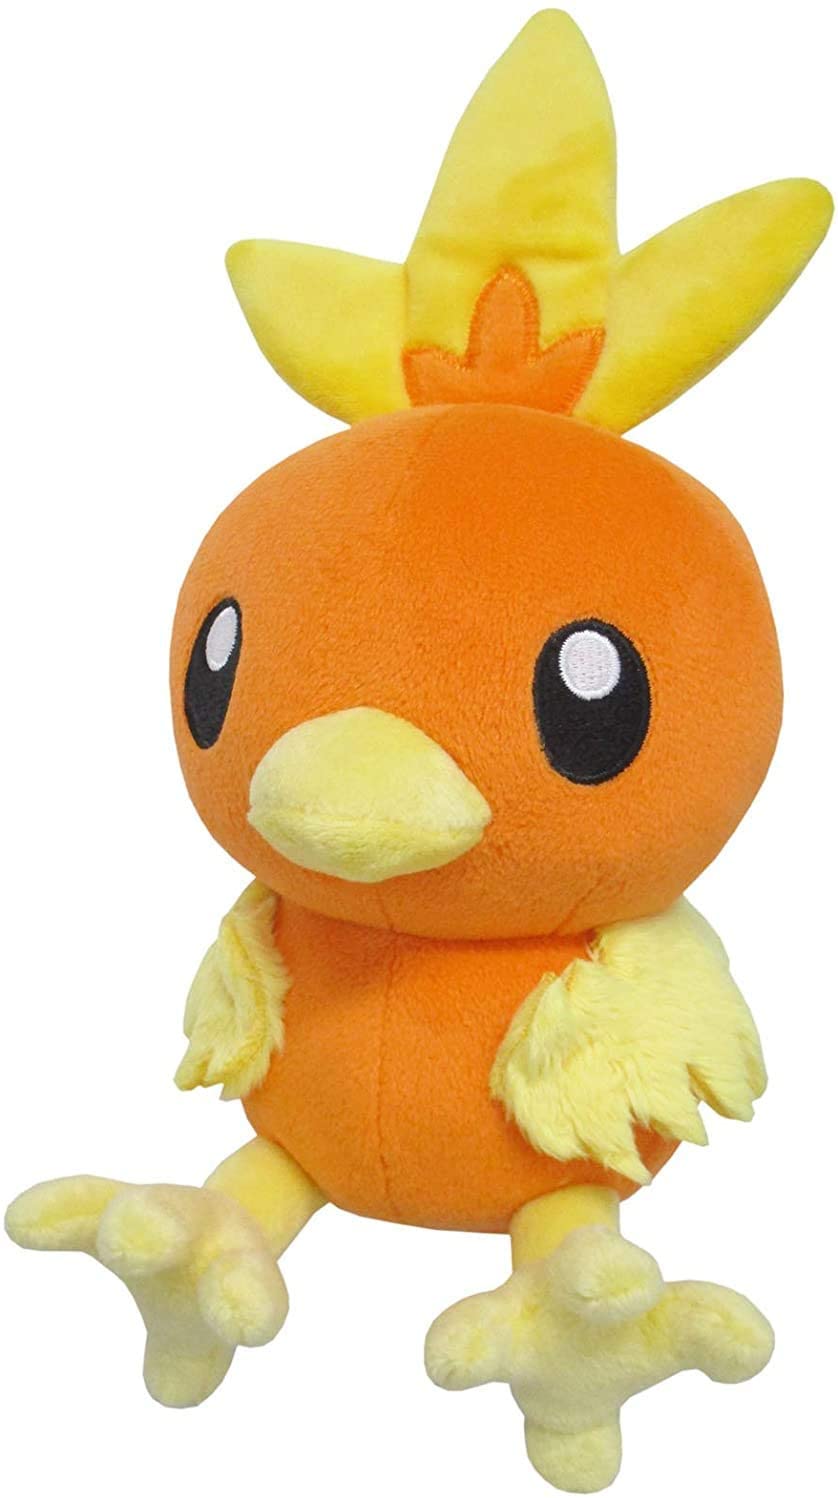 Sanei All Star Collection 6 Inch Plush - Torchic PP067